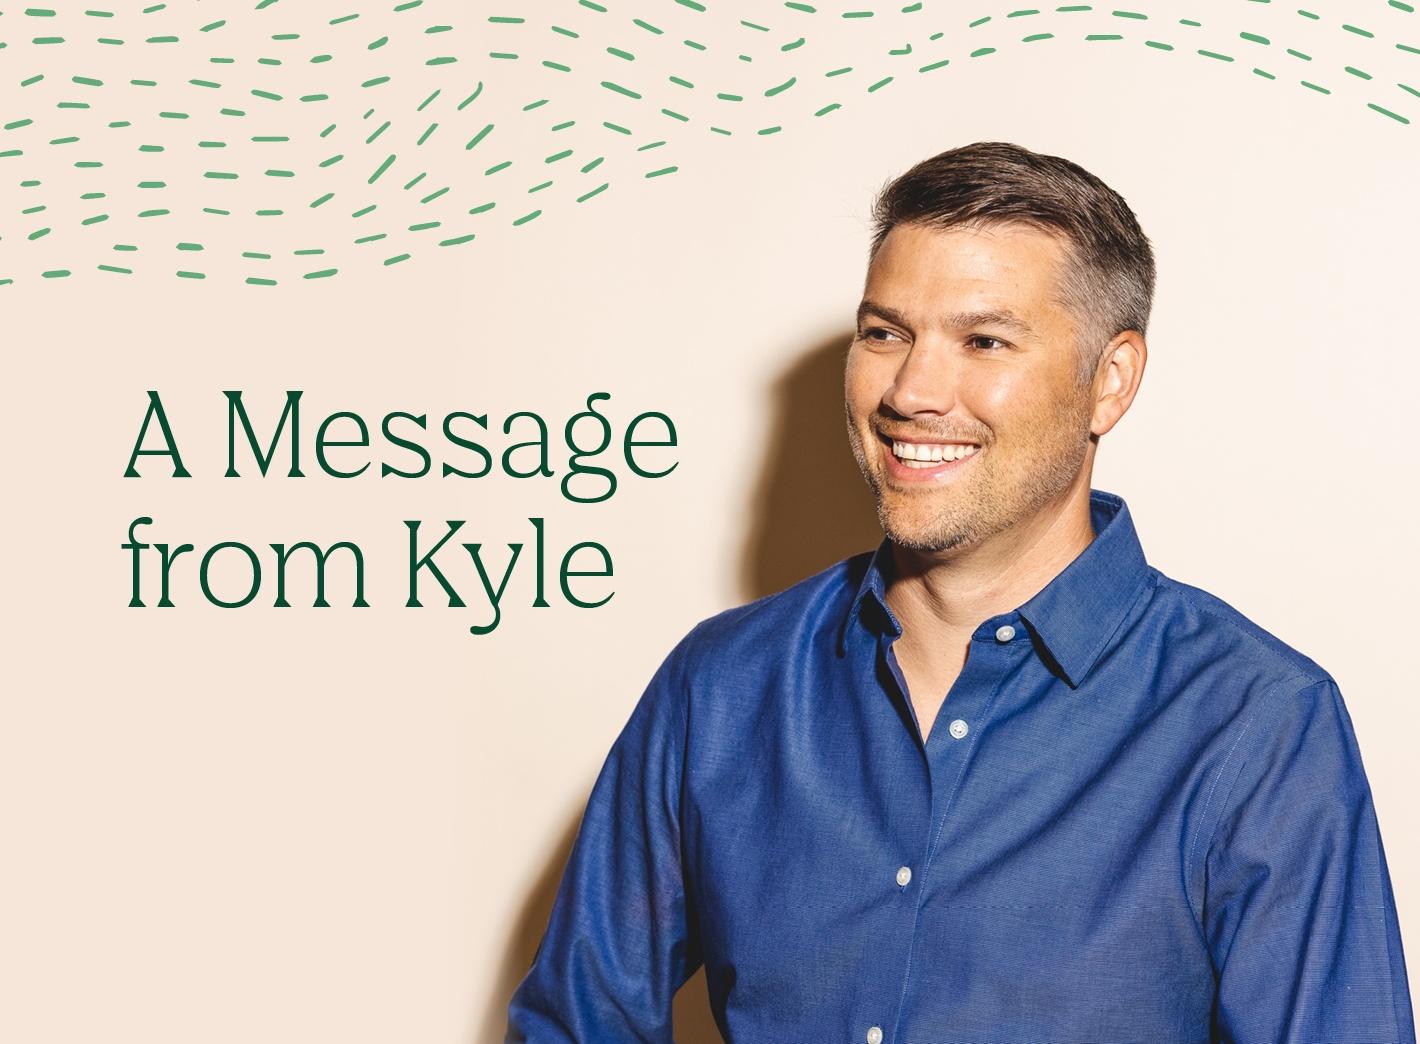 "A message from Kyle"